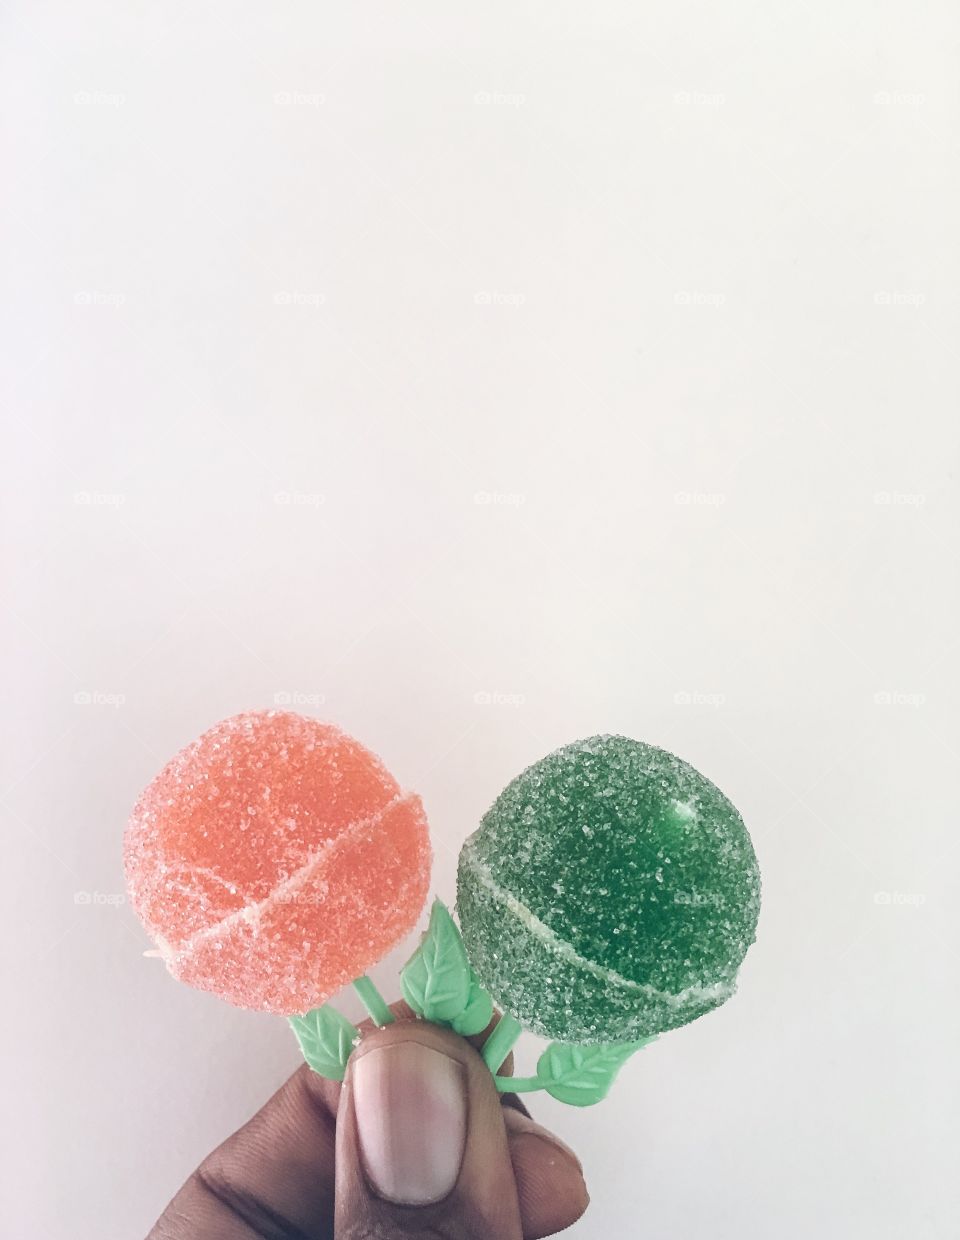 Person holding lollipop against white background